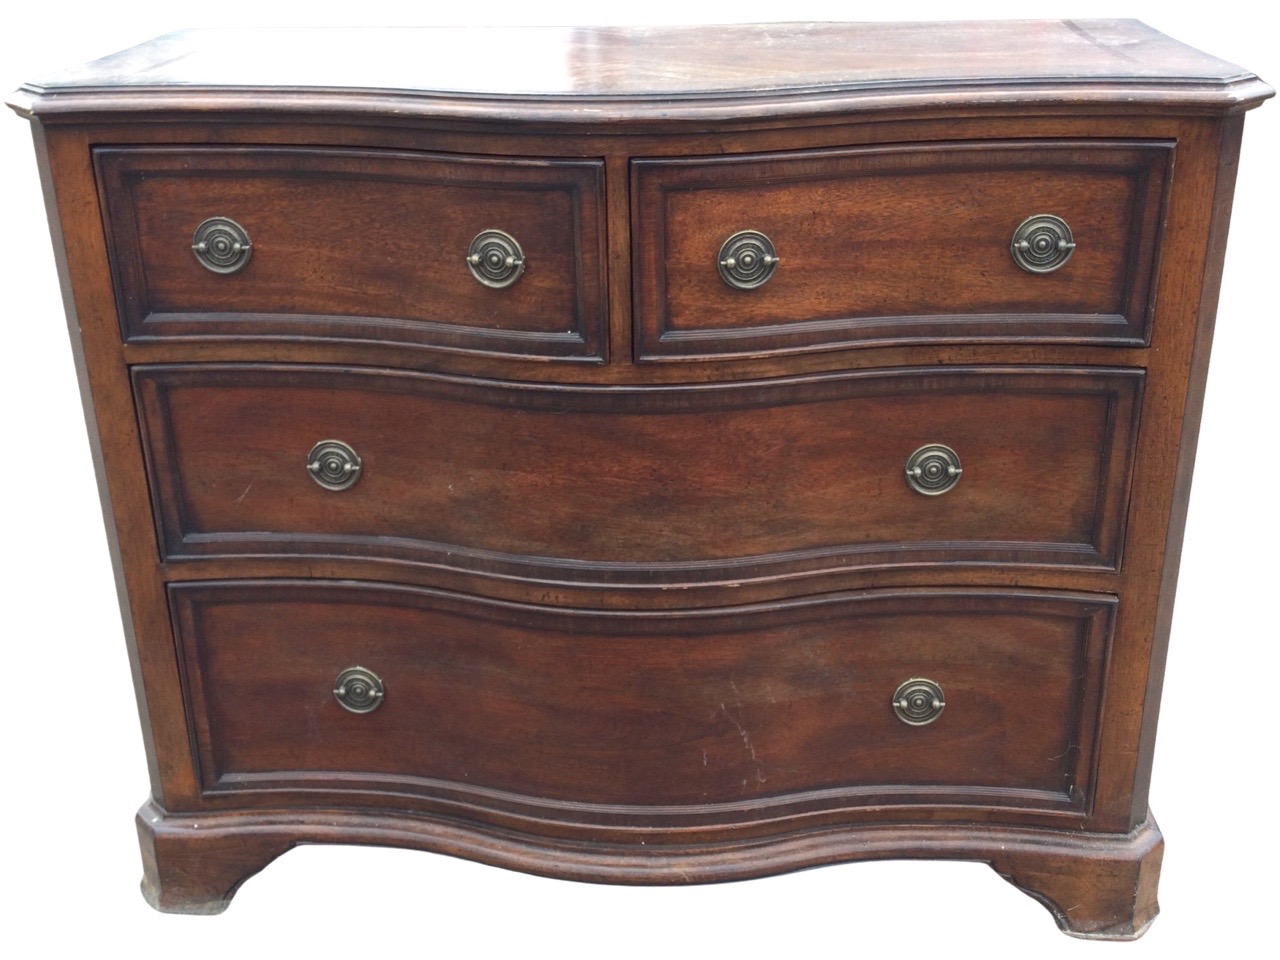 A Georgian style serpentine shaped chest by Willis & Gambier, the canted crossbanded top above two